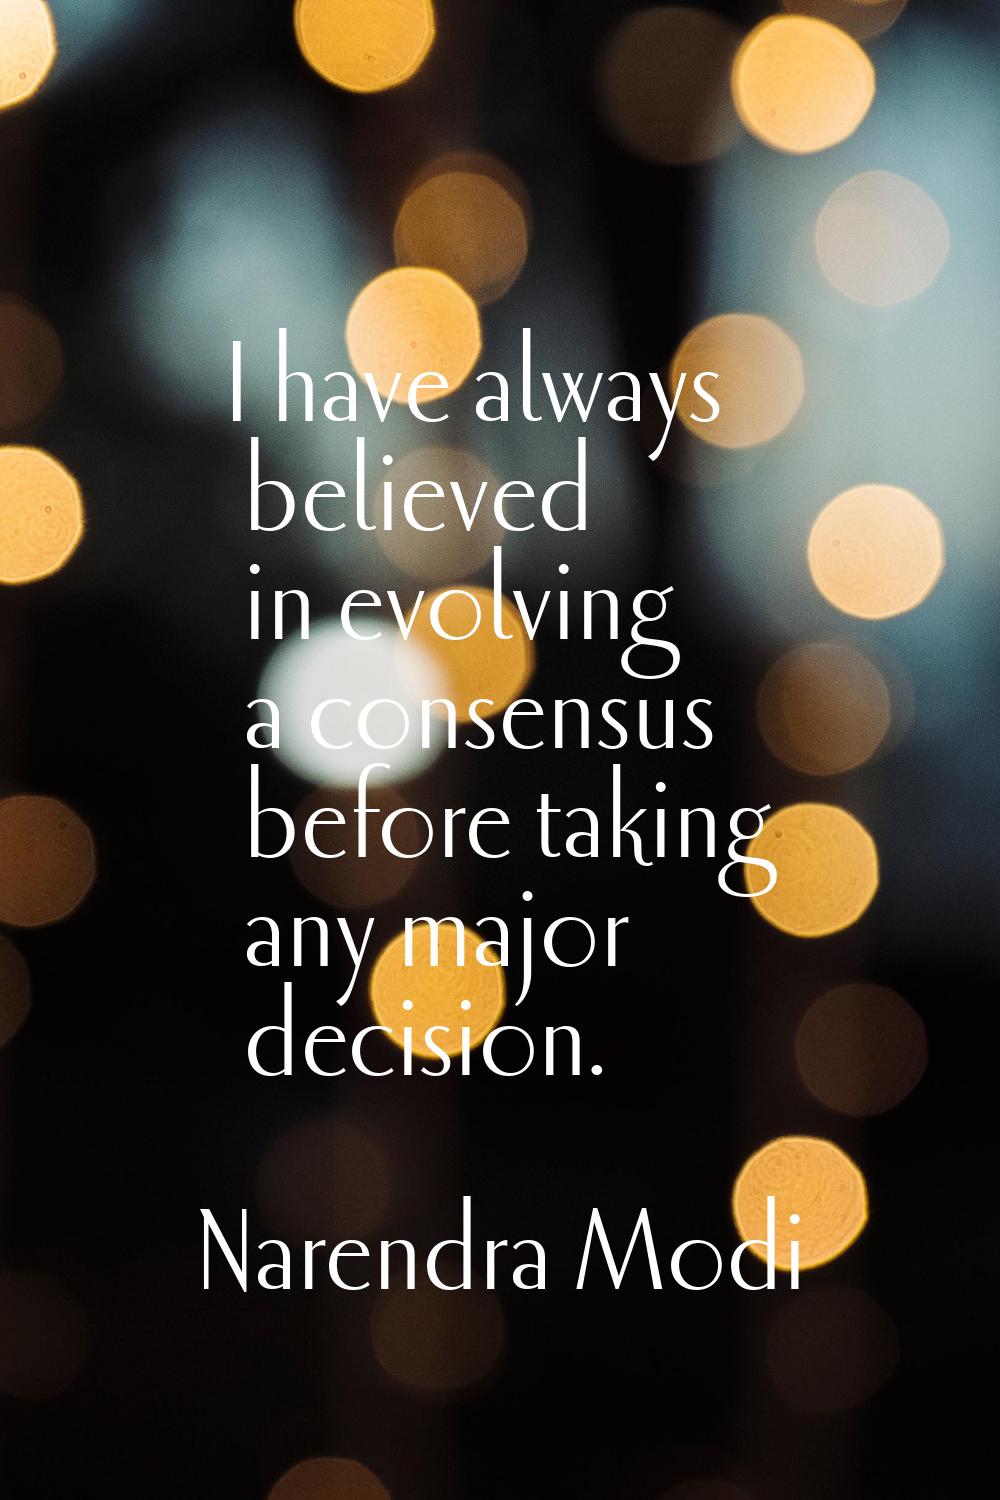 I have always believed in evolving a consensus before taking any major decision.